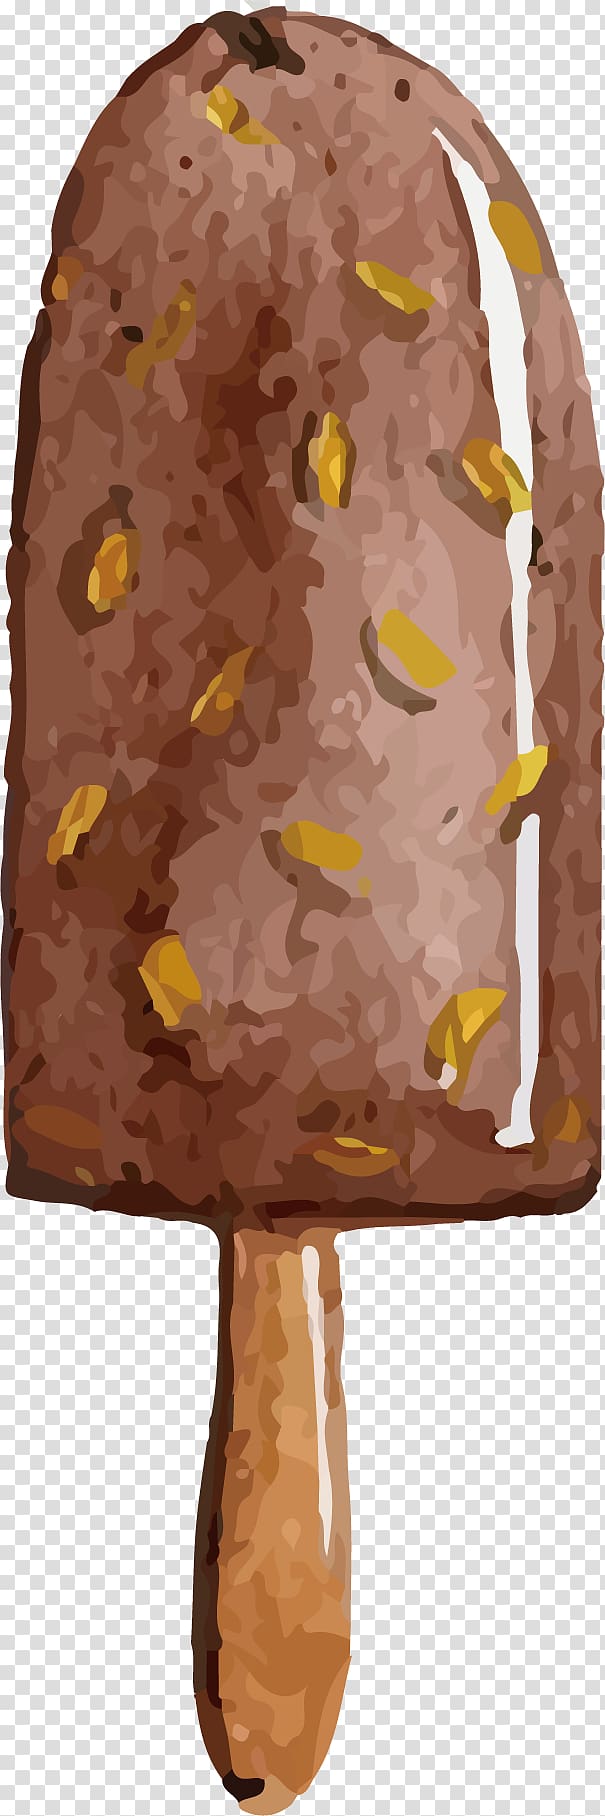 Ice cream cone Ice pop Chocolate, hand-painted chocolate popsicle transparent background PNG clipart